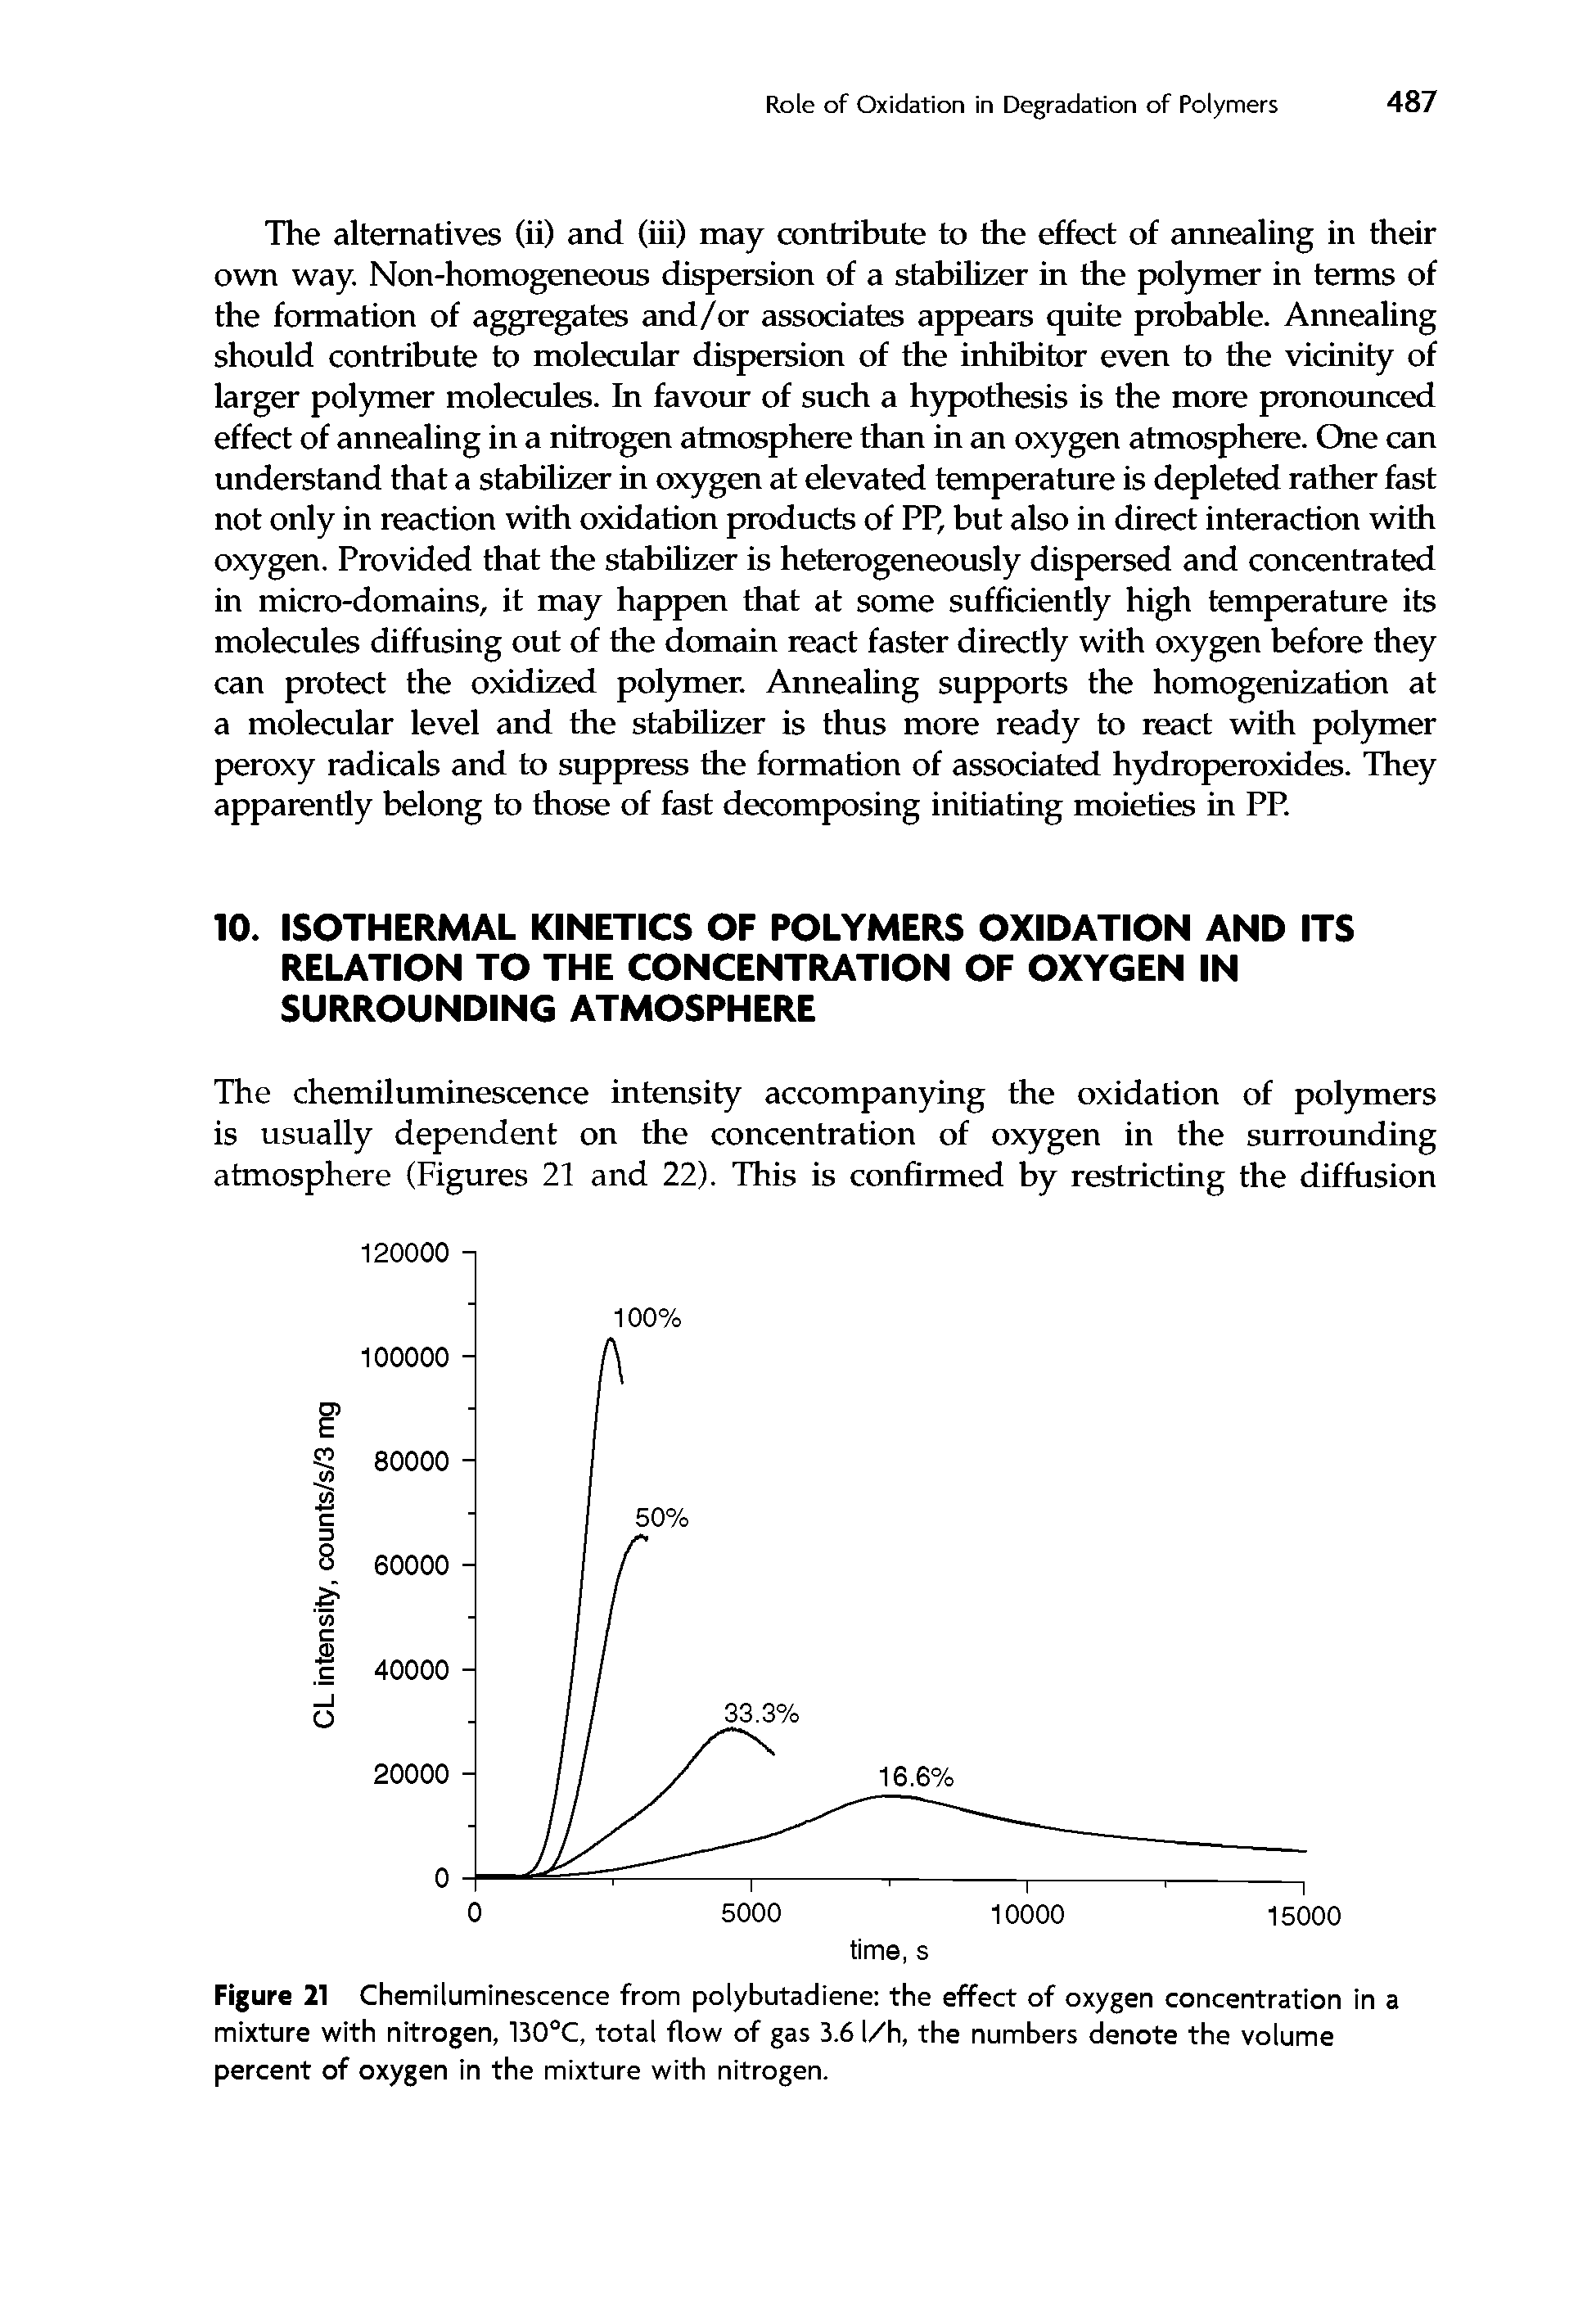 Figure 21 Chemiluminescence from polybutadiene the effect of oxygen concentration in a mixture with nitrogen, 130°C, total flow of gas 3.6 l/h, the numbers denote the volume percent of oxygen in the mixture with nitrogen.